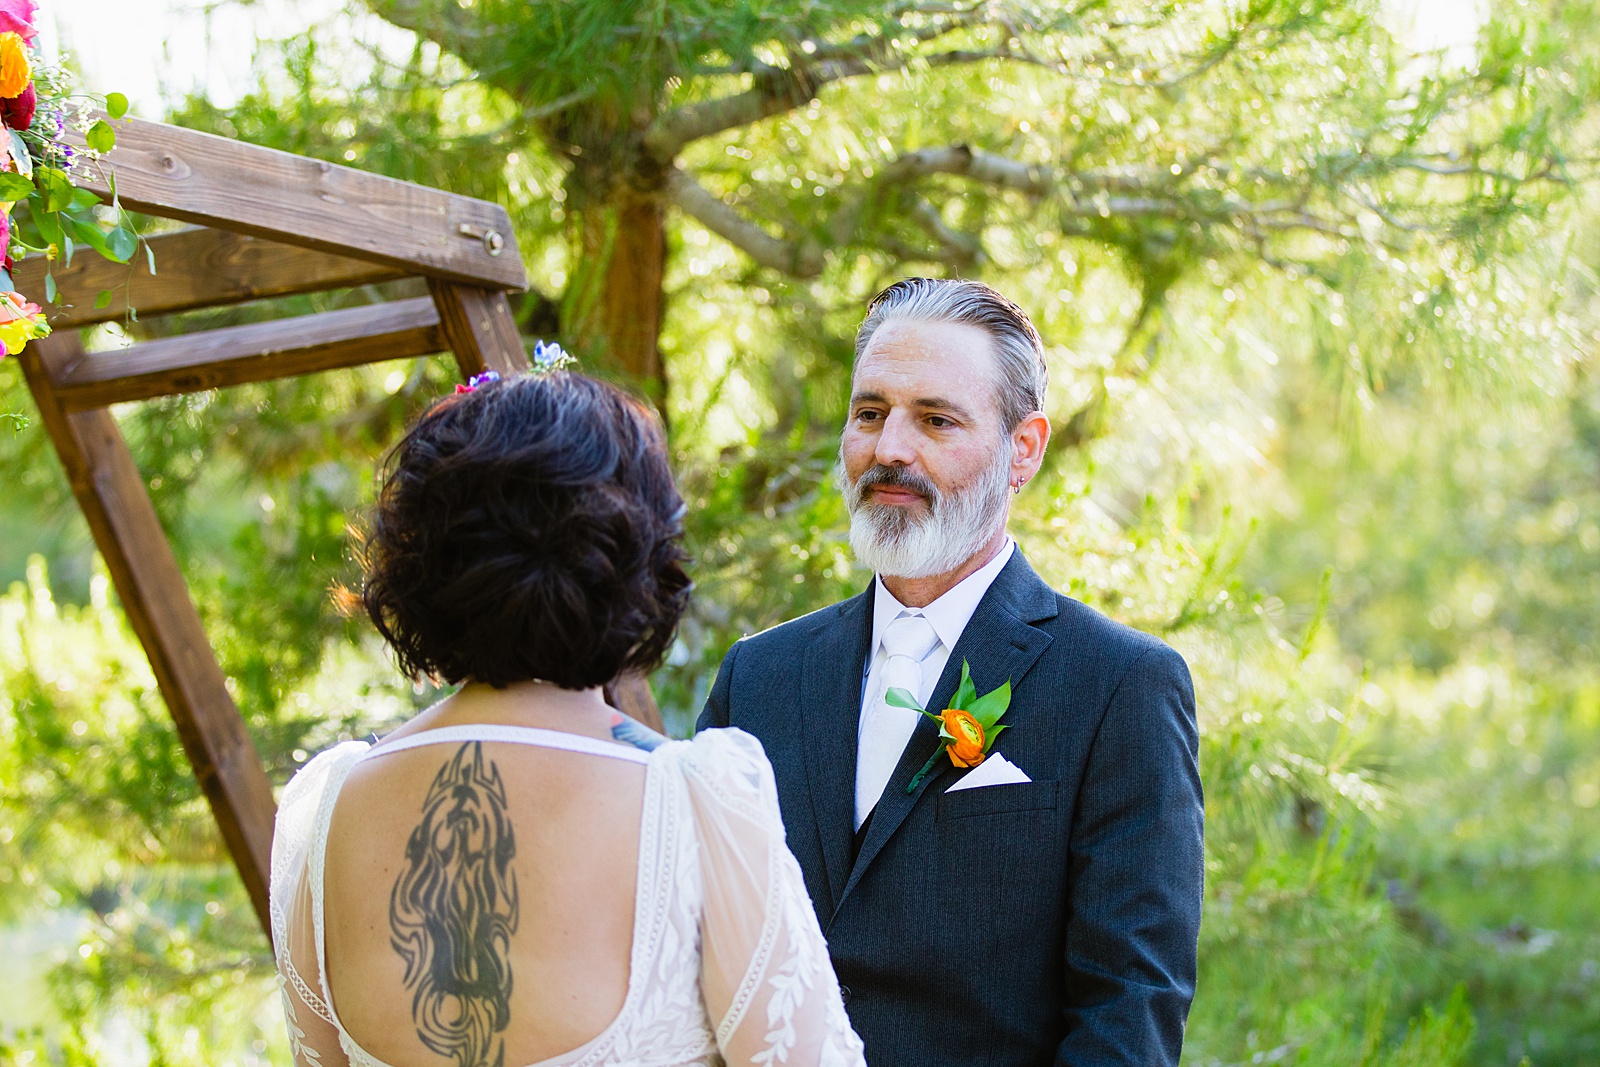 Groom looking at his bride during their wedding ceremony at Japanese Friendship Garden by Phoenix wedding photographer PMA Photography.